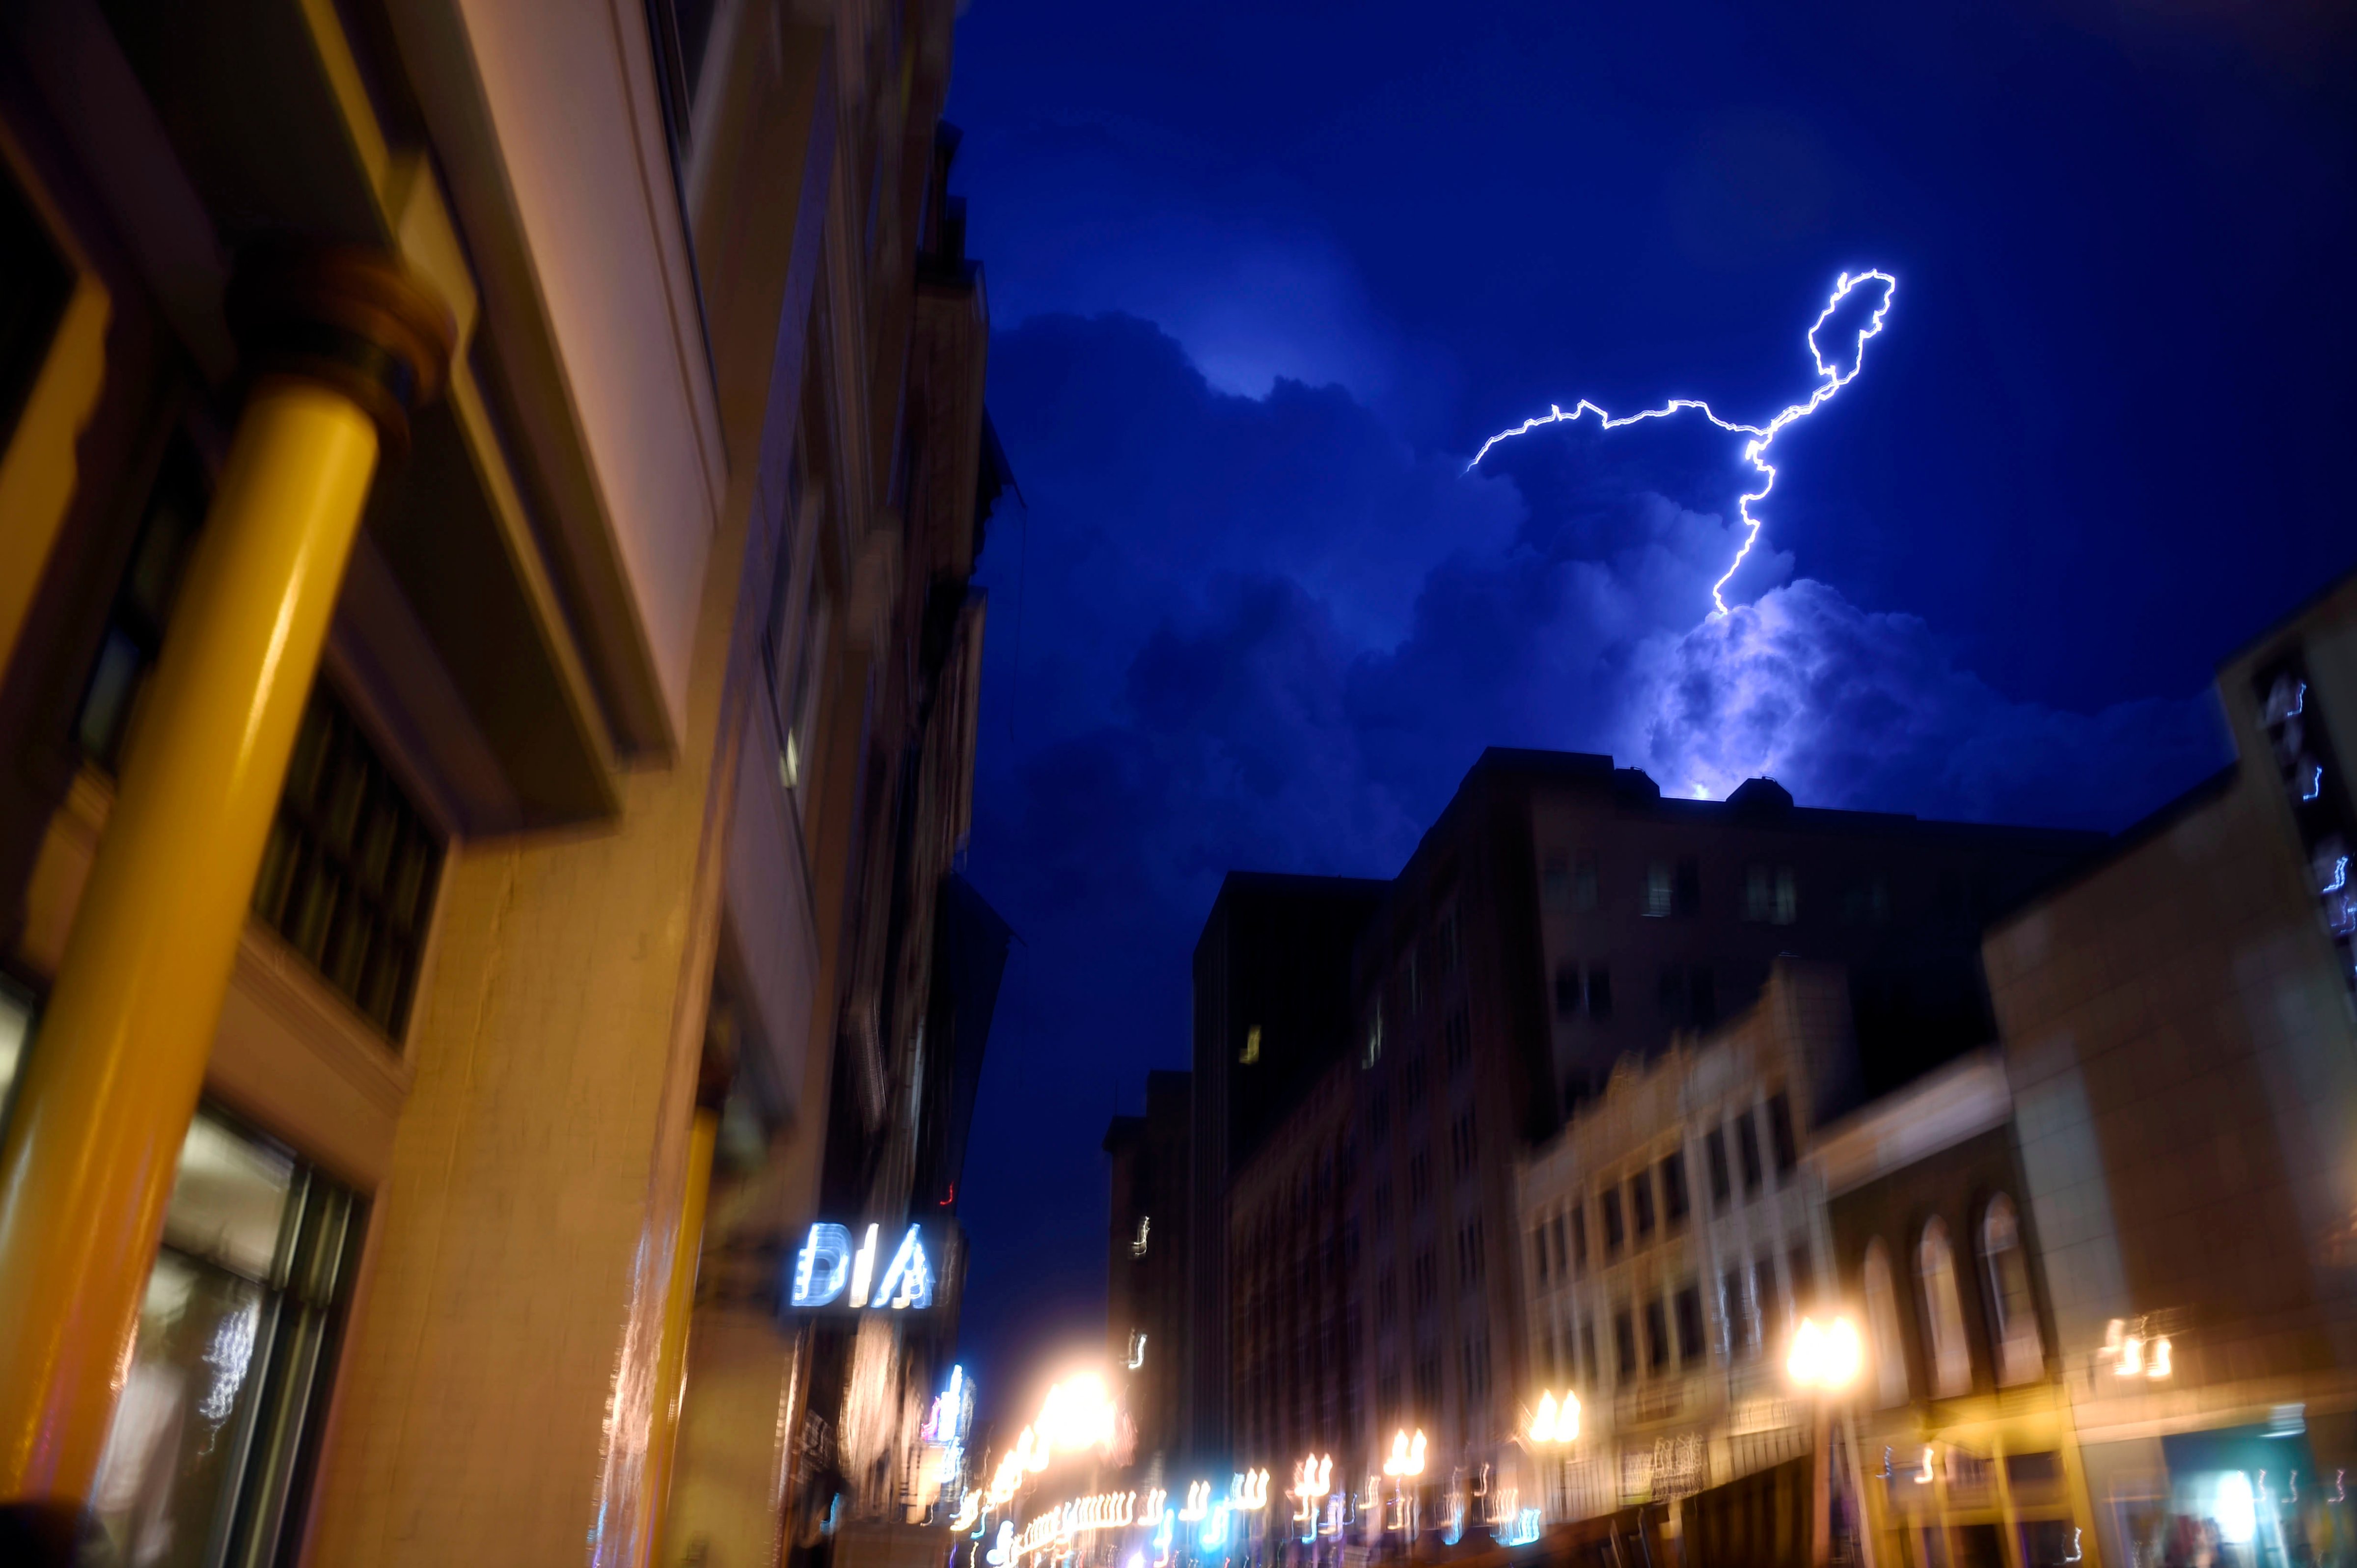 Lightning strikes over downtown in Knoxville, Tenn., on July 27, 2014. (Saul Young—The Knoxville News Sentinel/AP)